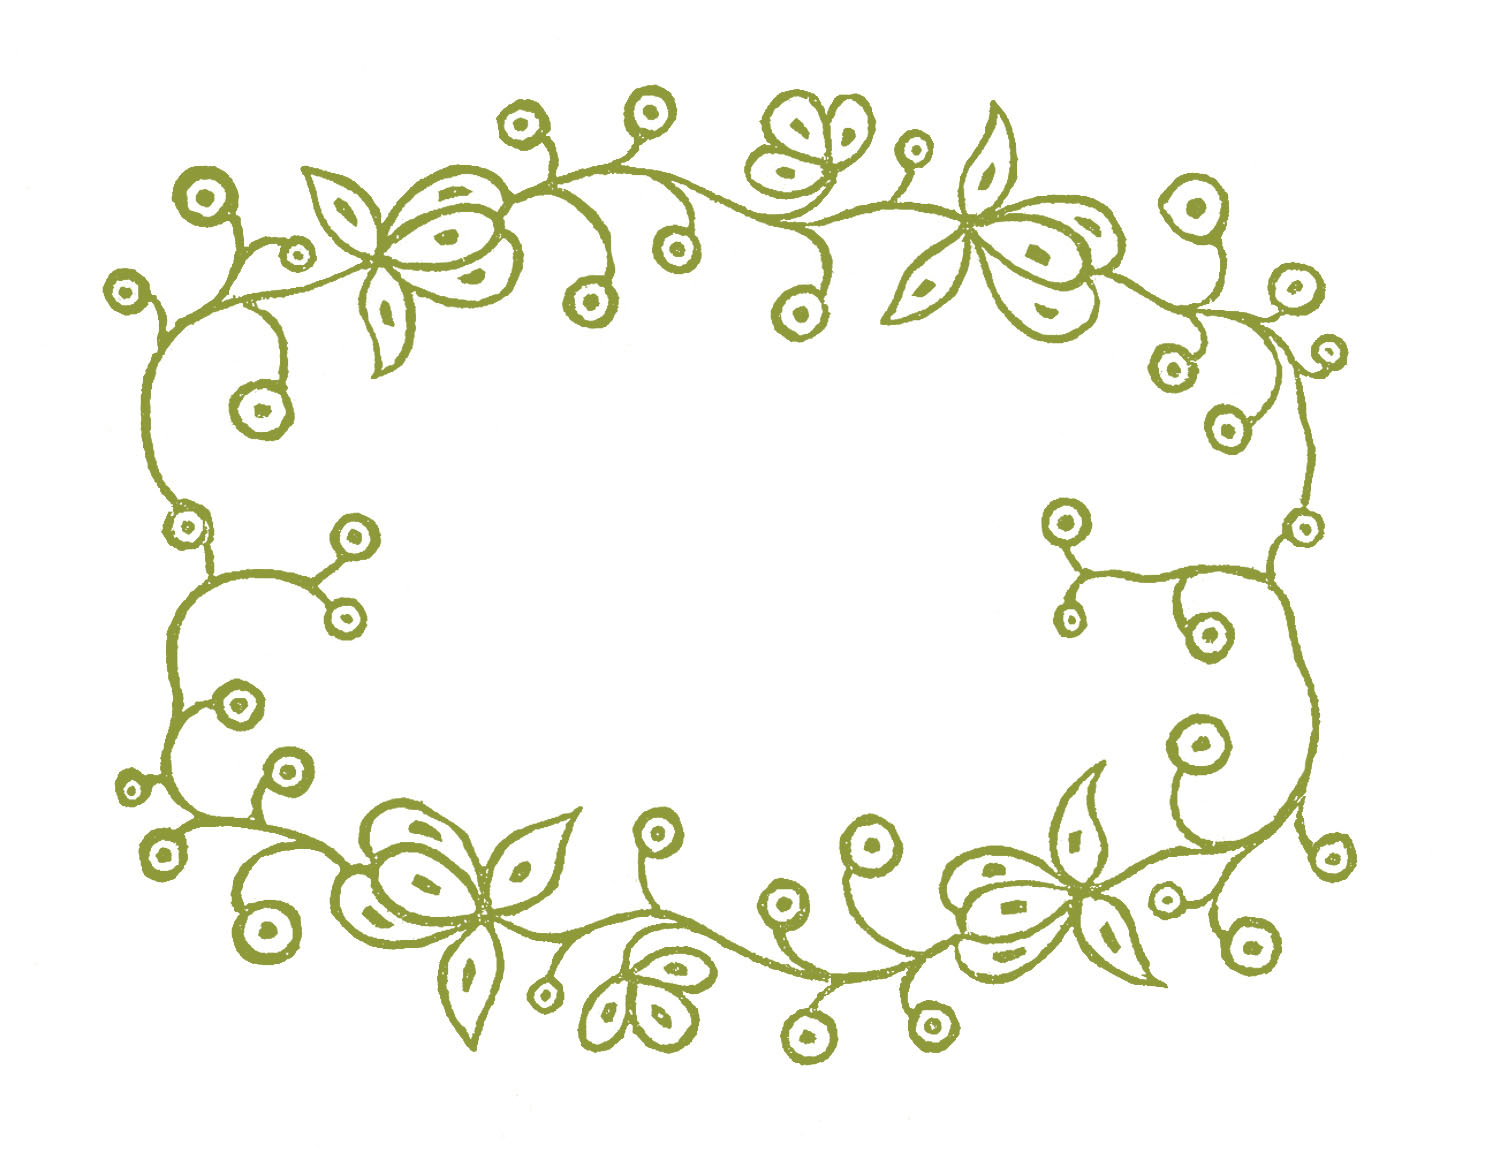 Paper Embroidery Patterns Free Royalty Free Images Embroidery Patterns Floral Frames The